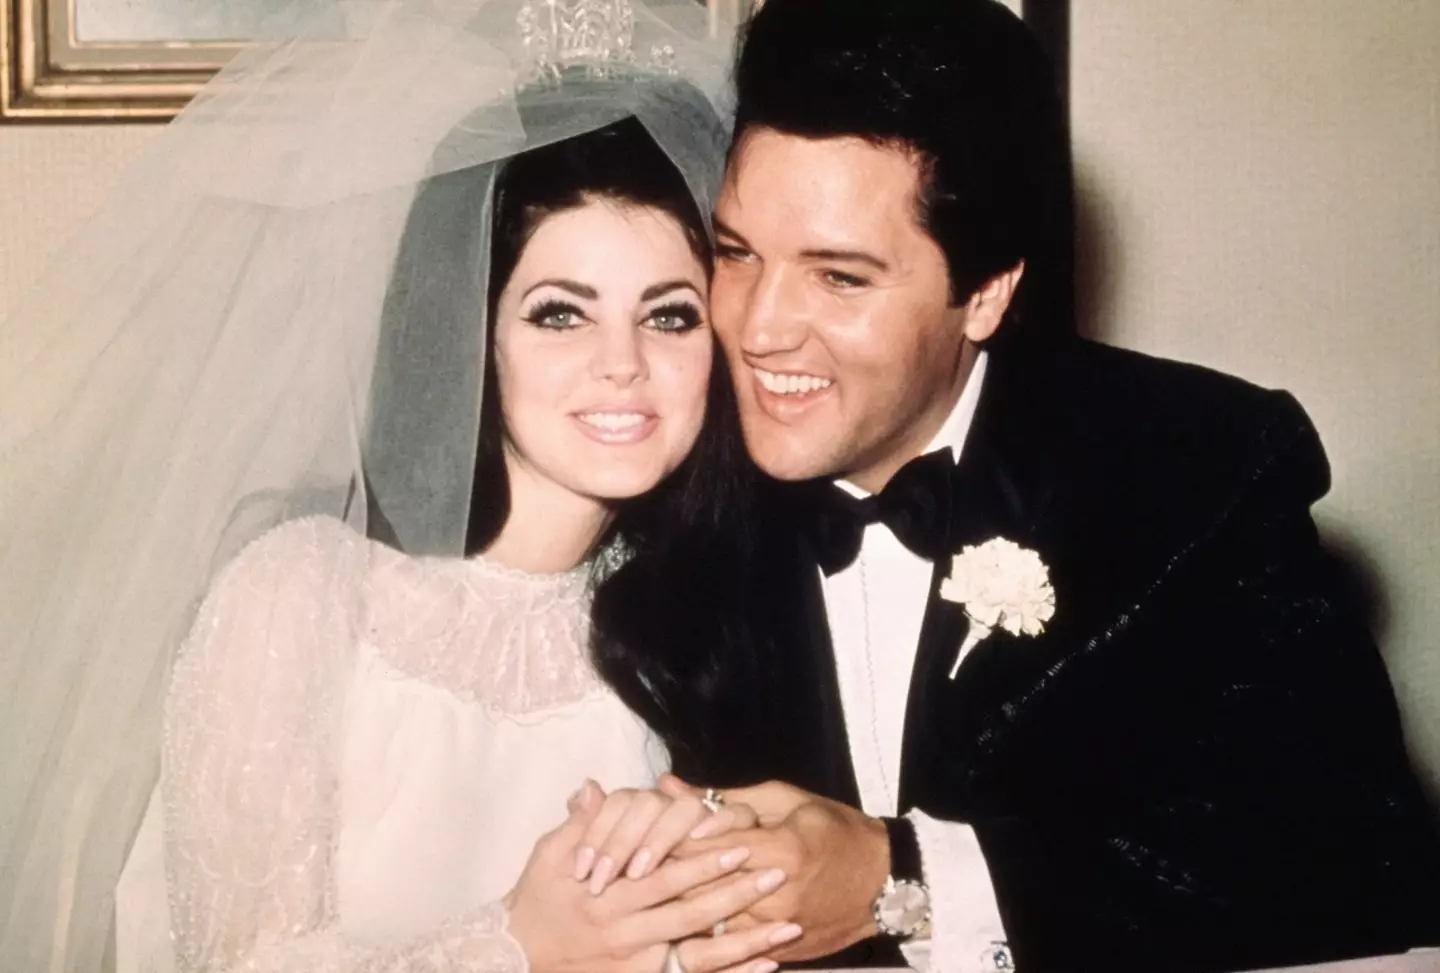 Priscilla Presley has responded to grooming allegations following her relationship with Elvis Presley when she was just 14 years old.